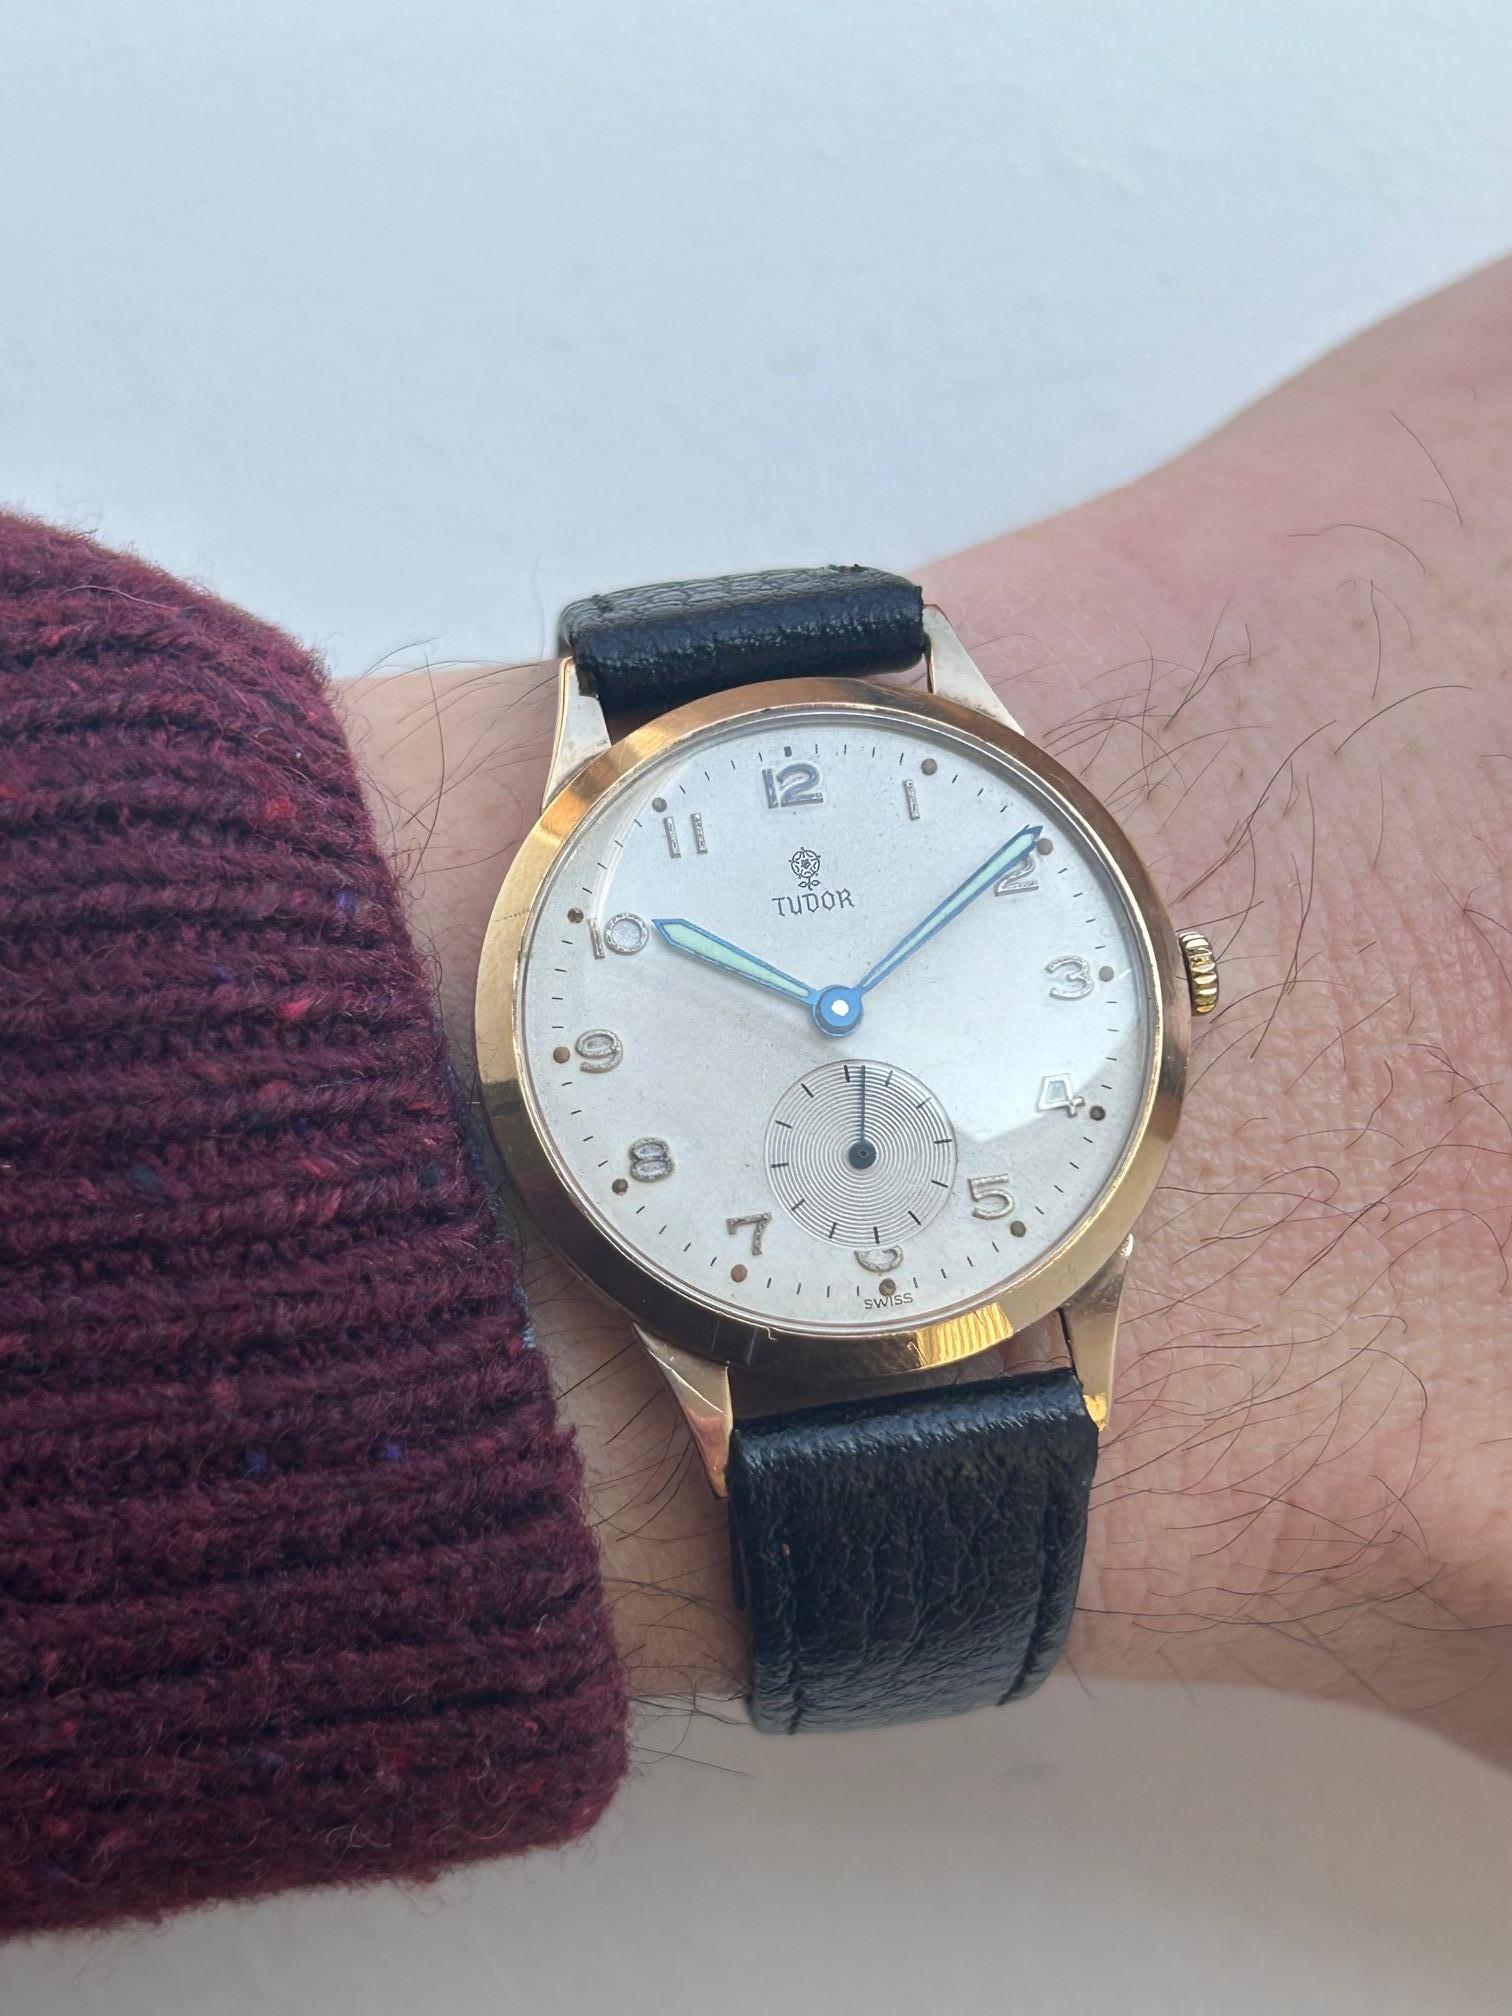 Our vintage and very attractive, manual wind, round 9k yellow gold cased Tudor, with sub seconds dial and ivory coloured arabic numeral dial, is presented in excellent condition given its age. The case measures 33mm with crown (32mm without) and